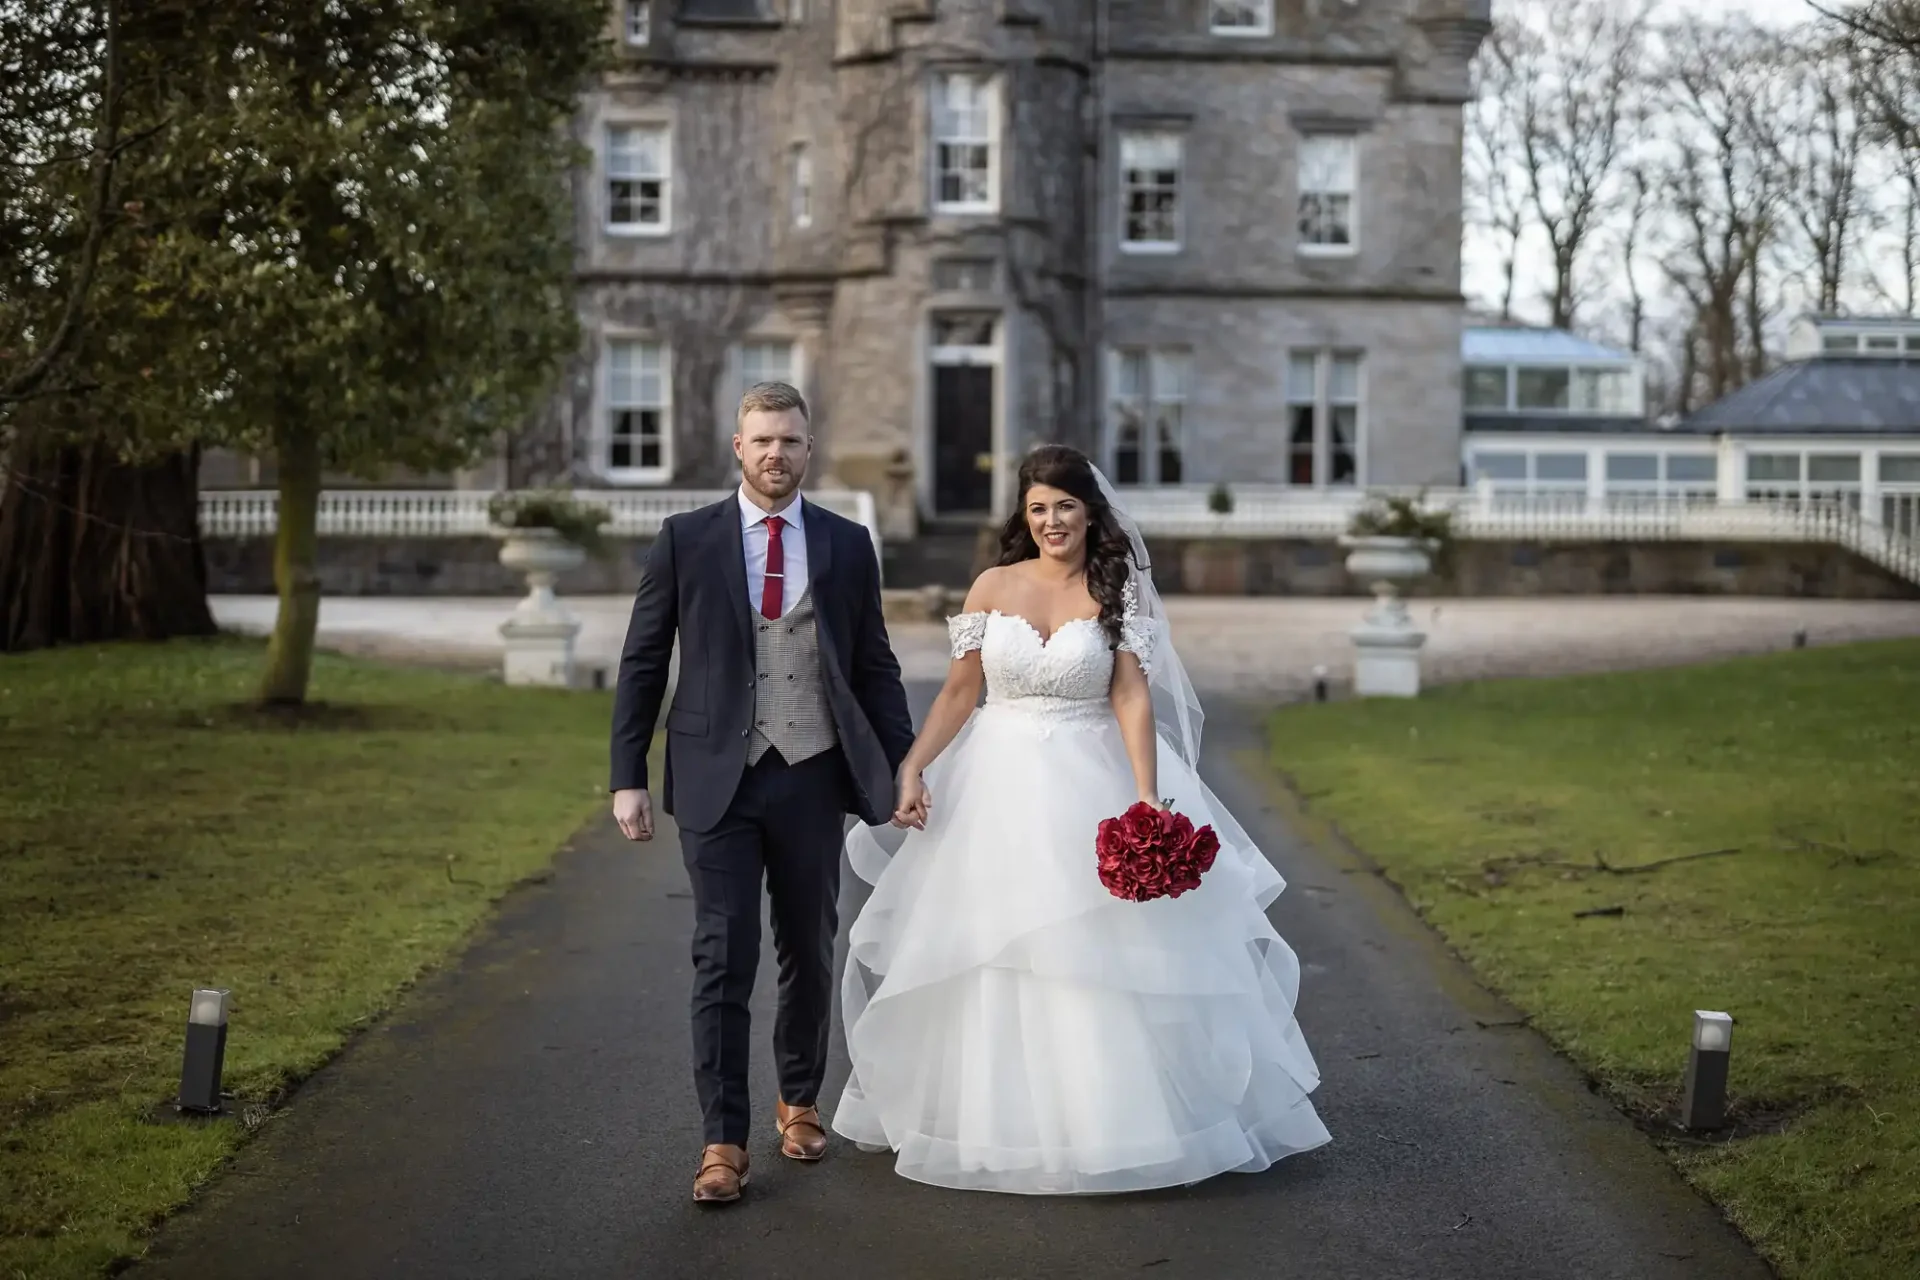 A bride and groom walking hand in hand in front of a historic stone castle, the bride holding a red bouquet.